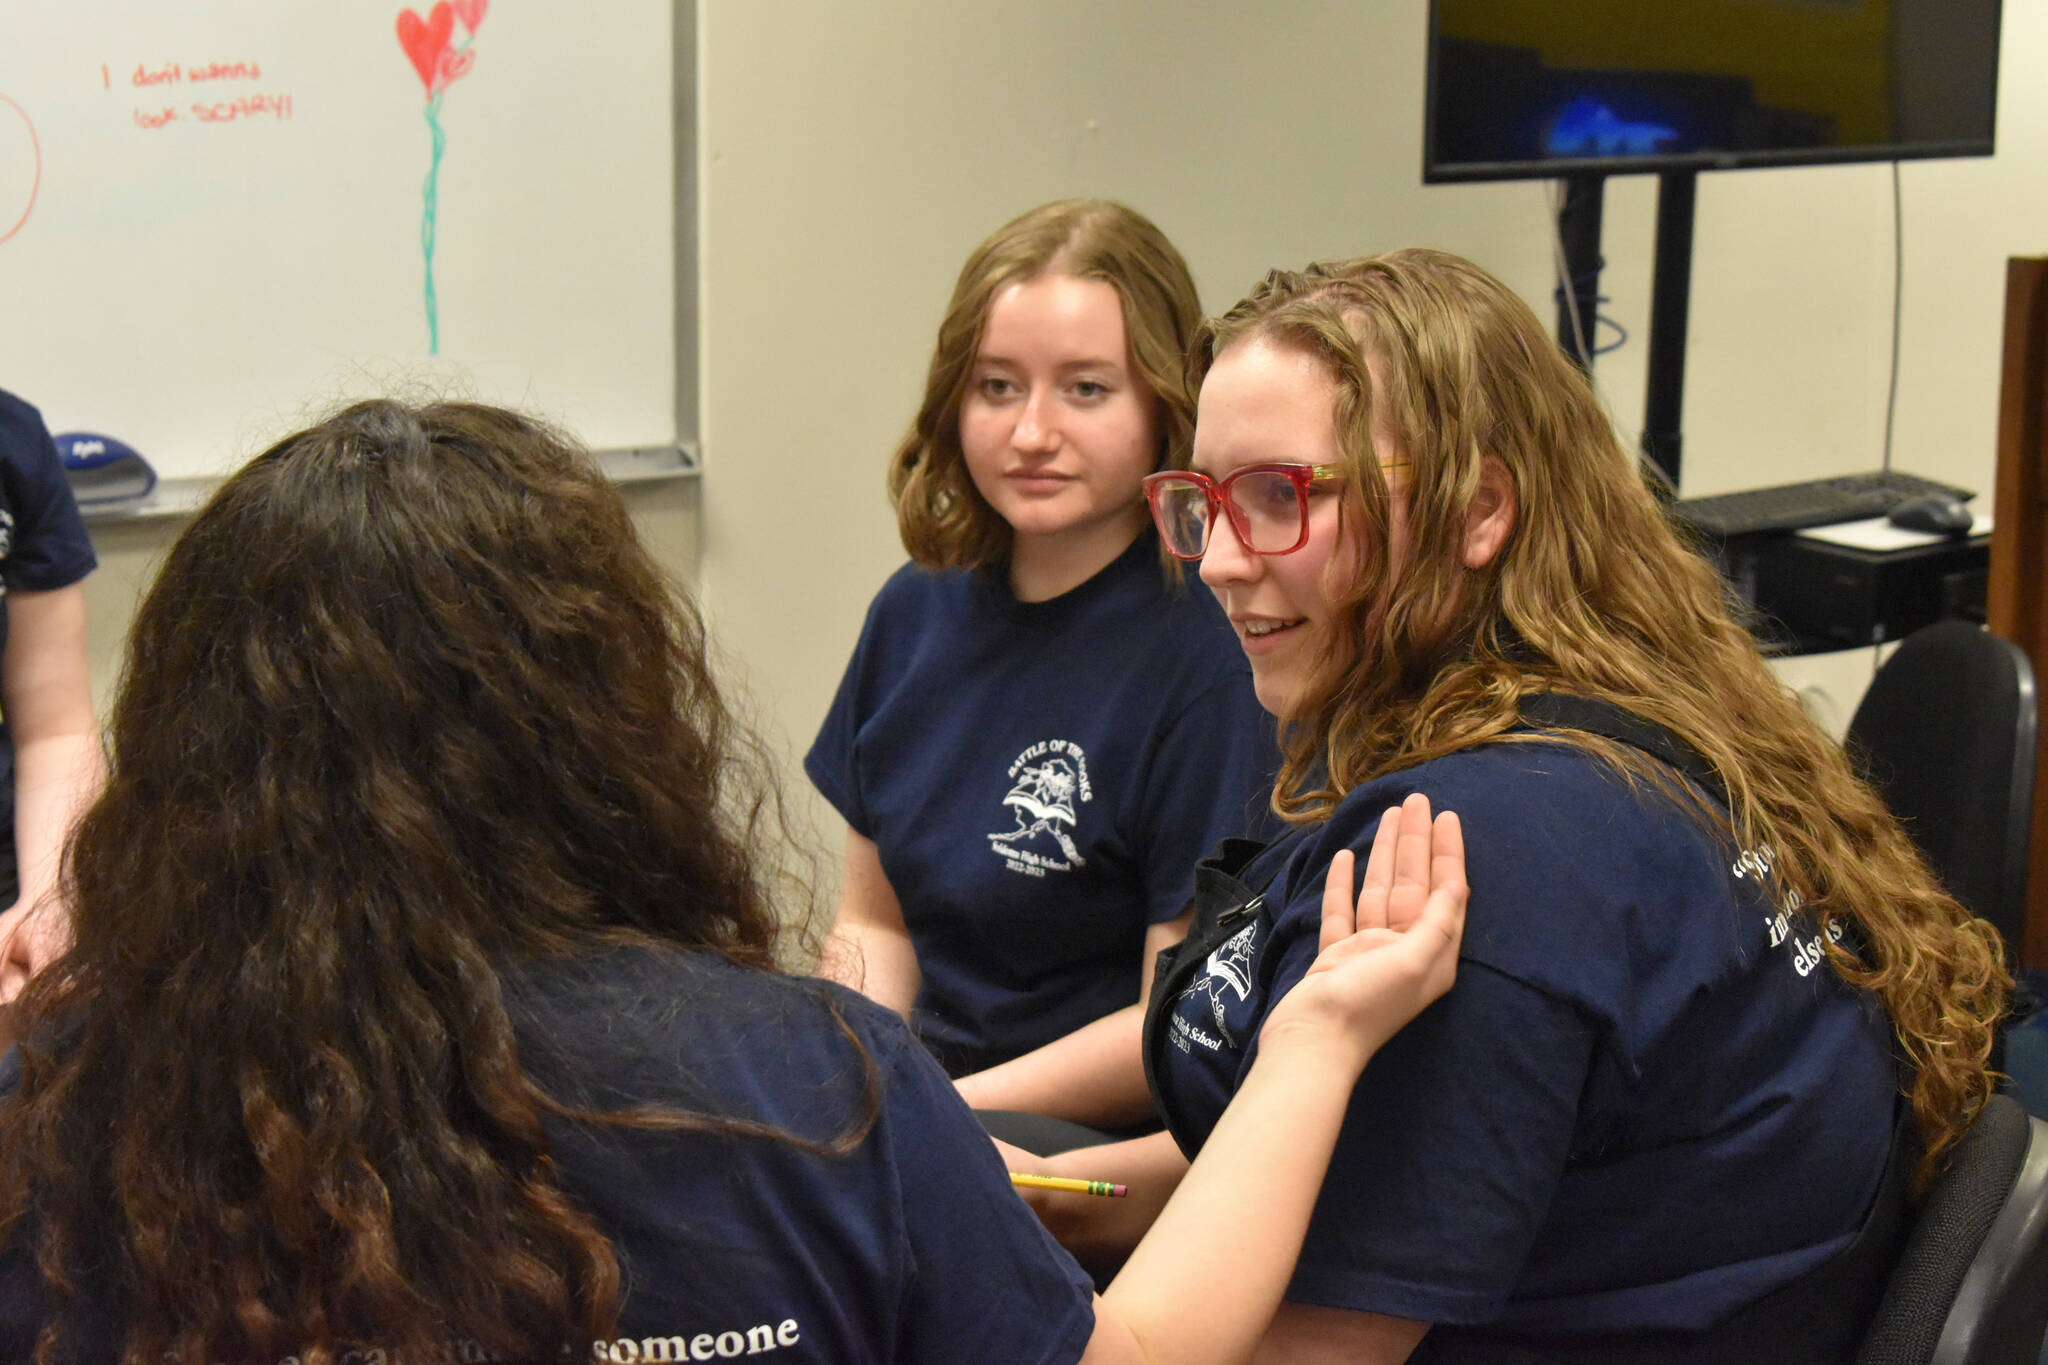 Lyndzi Gaucin describes her reasoning to her teammates, Leihla Harrison and Emma Knowles as they discuss their response to a question during Kenai Peninsula Borough School District High School Battle of the Books Final on Tuesday, Feb. 7, 2023 at Soldotna High School in Soldotna, Alaska. (Jake Dye/Peninsula Clarion)